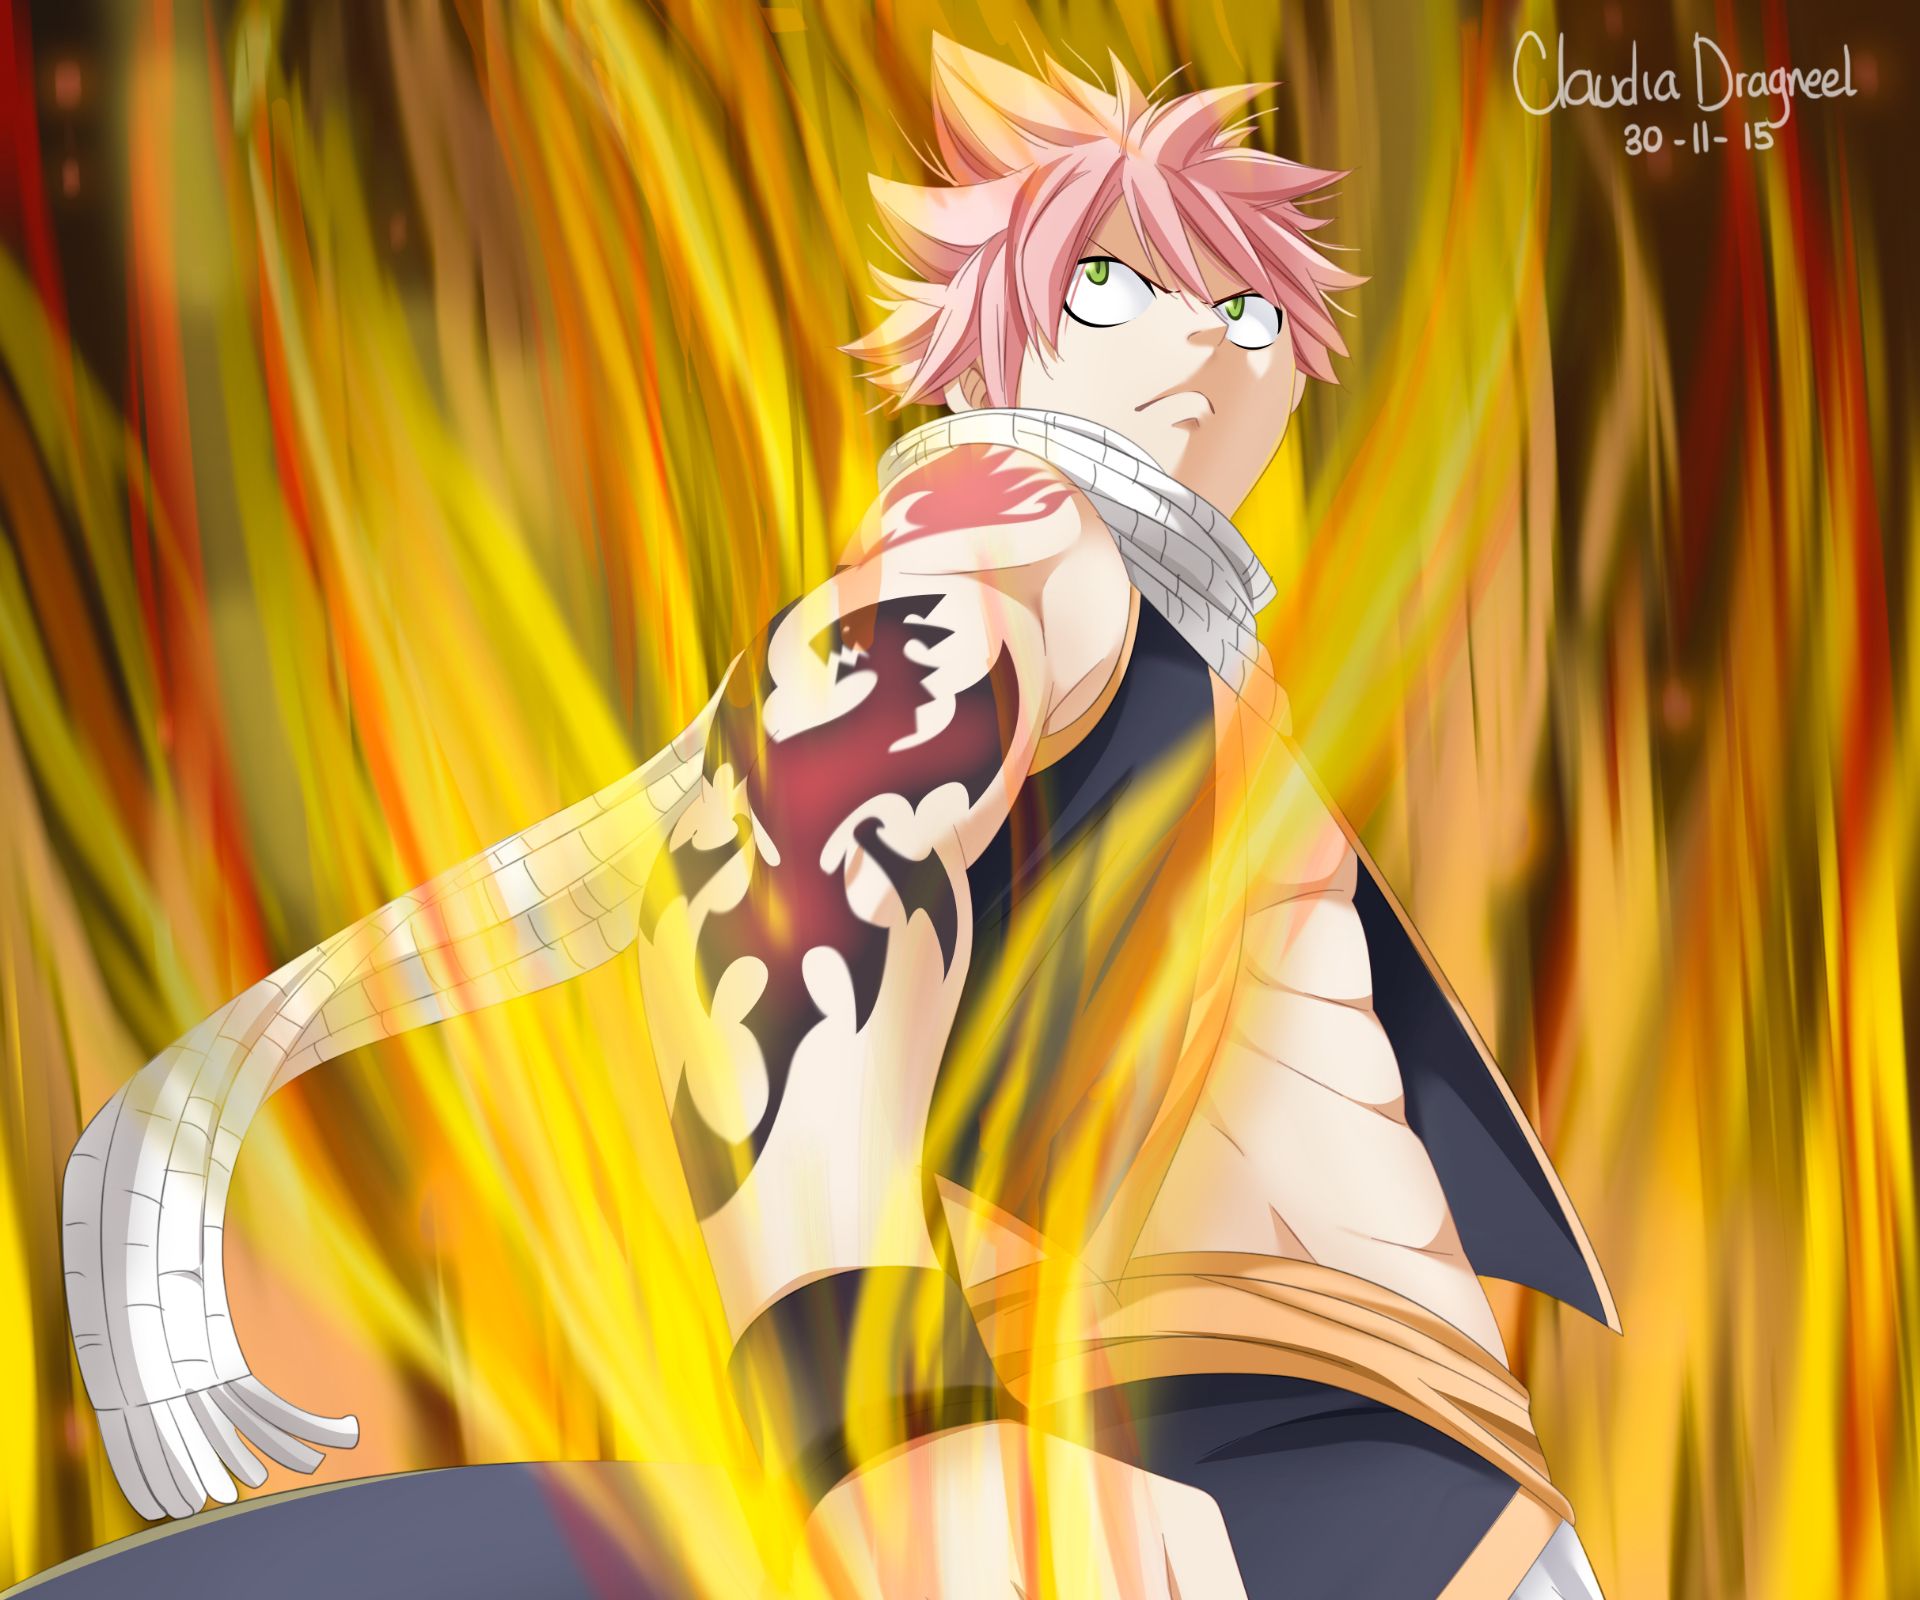 Anime Fairy Tail Wallpaper - Free Anime Downloads